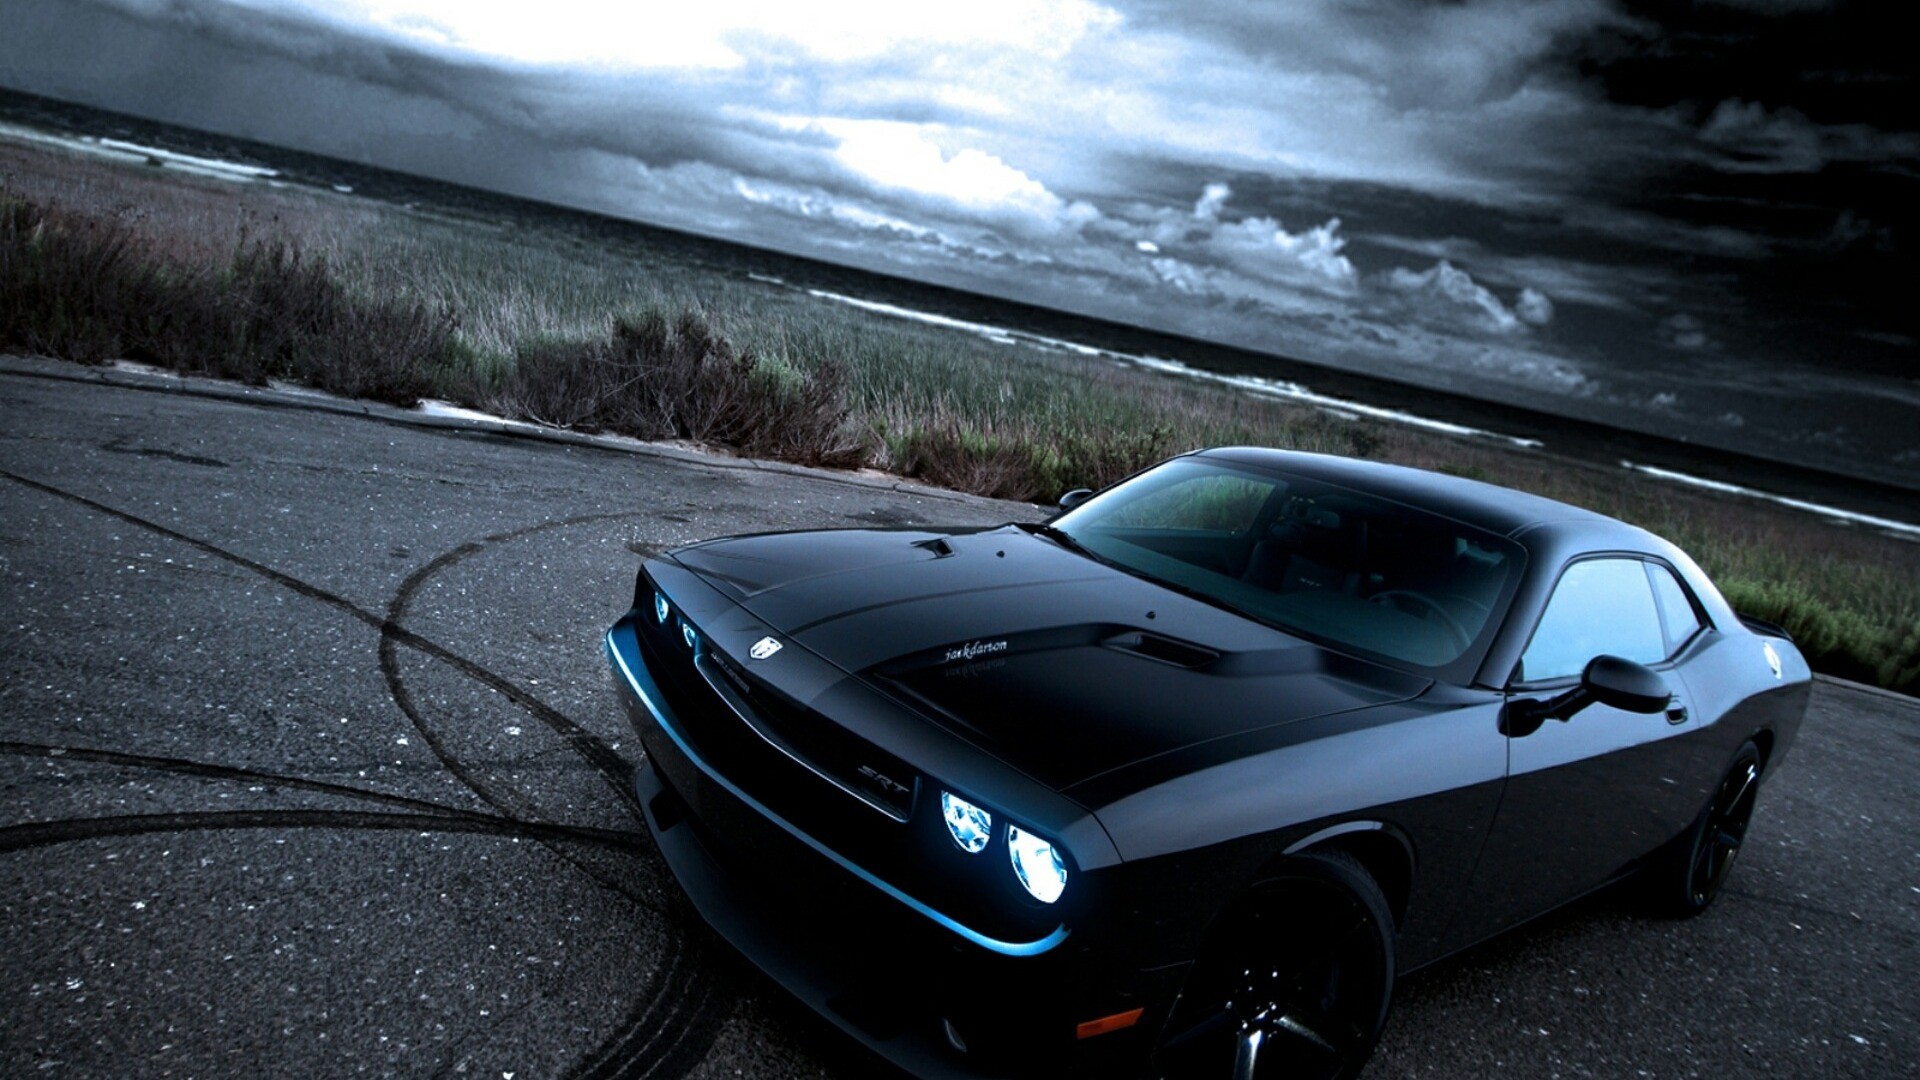 American Black Cars Muscle Dodge Challenger